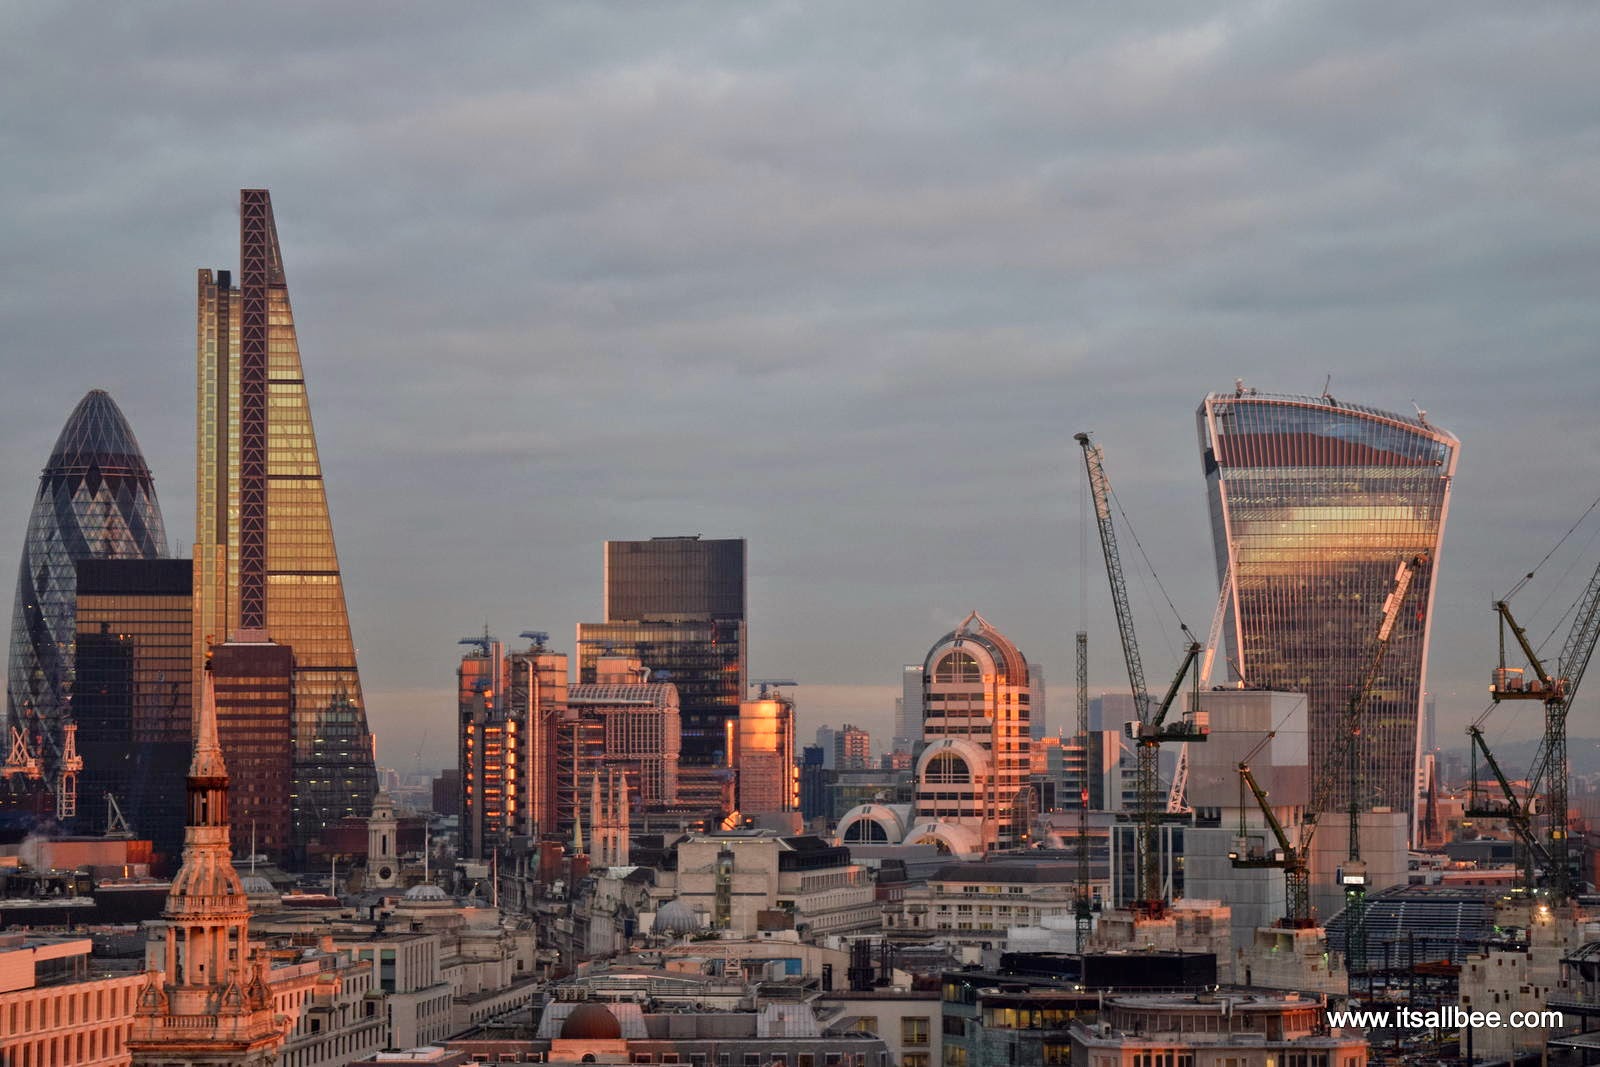 Sunset In London | 5 Top Places For The Best Sunset Views Of The London Skyline